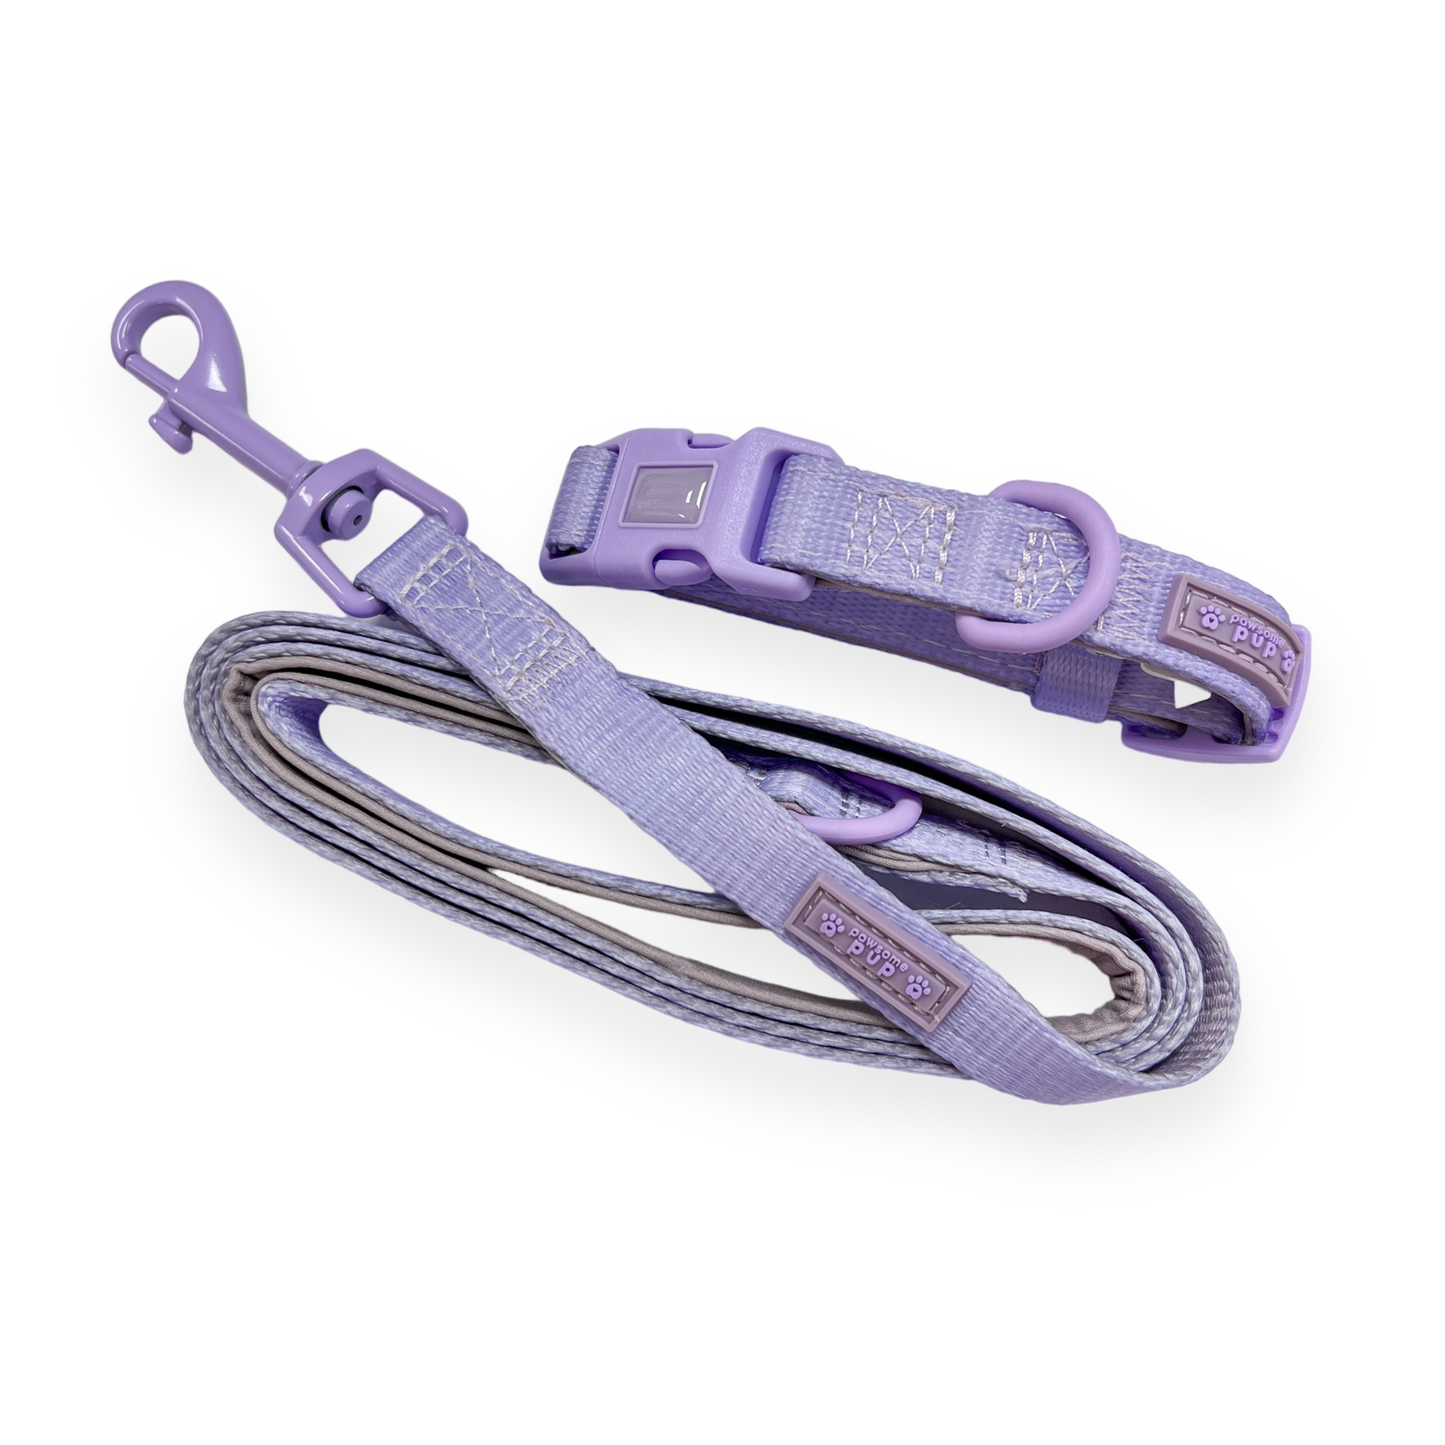 Pawsome Paws - Pawsome Pup Collar and Lead Set - Lilac